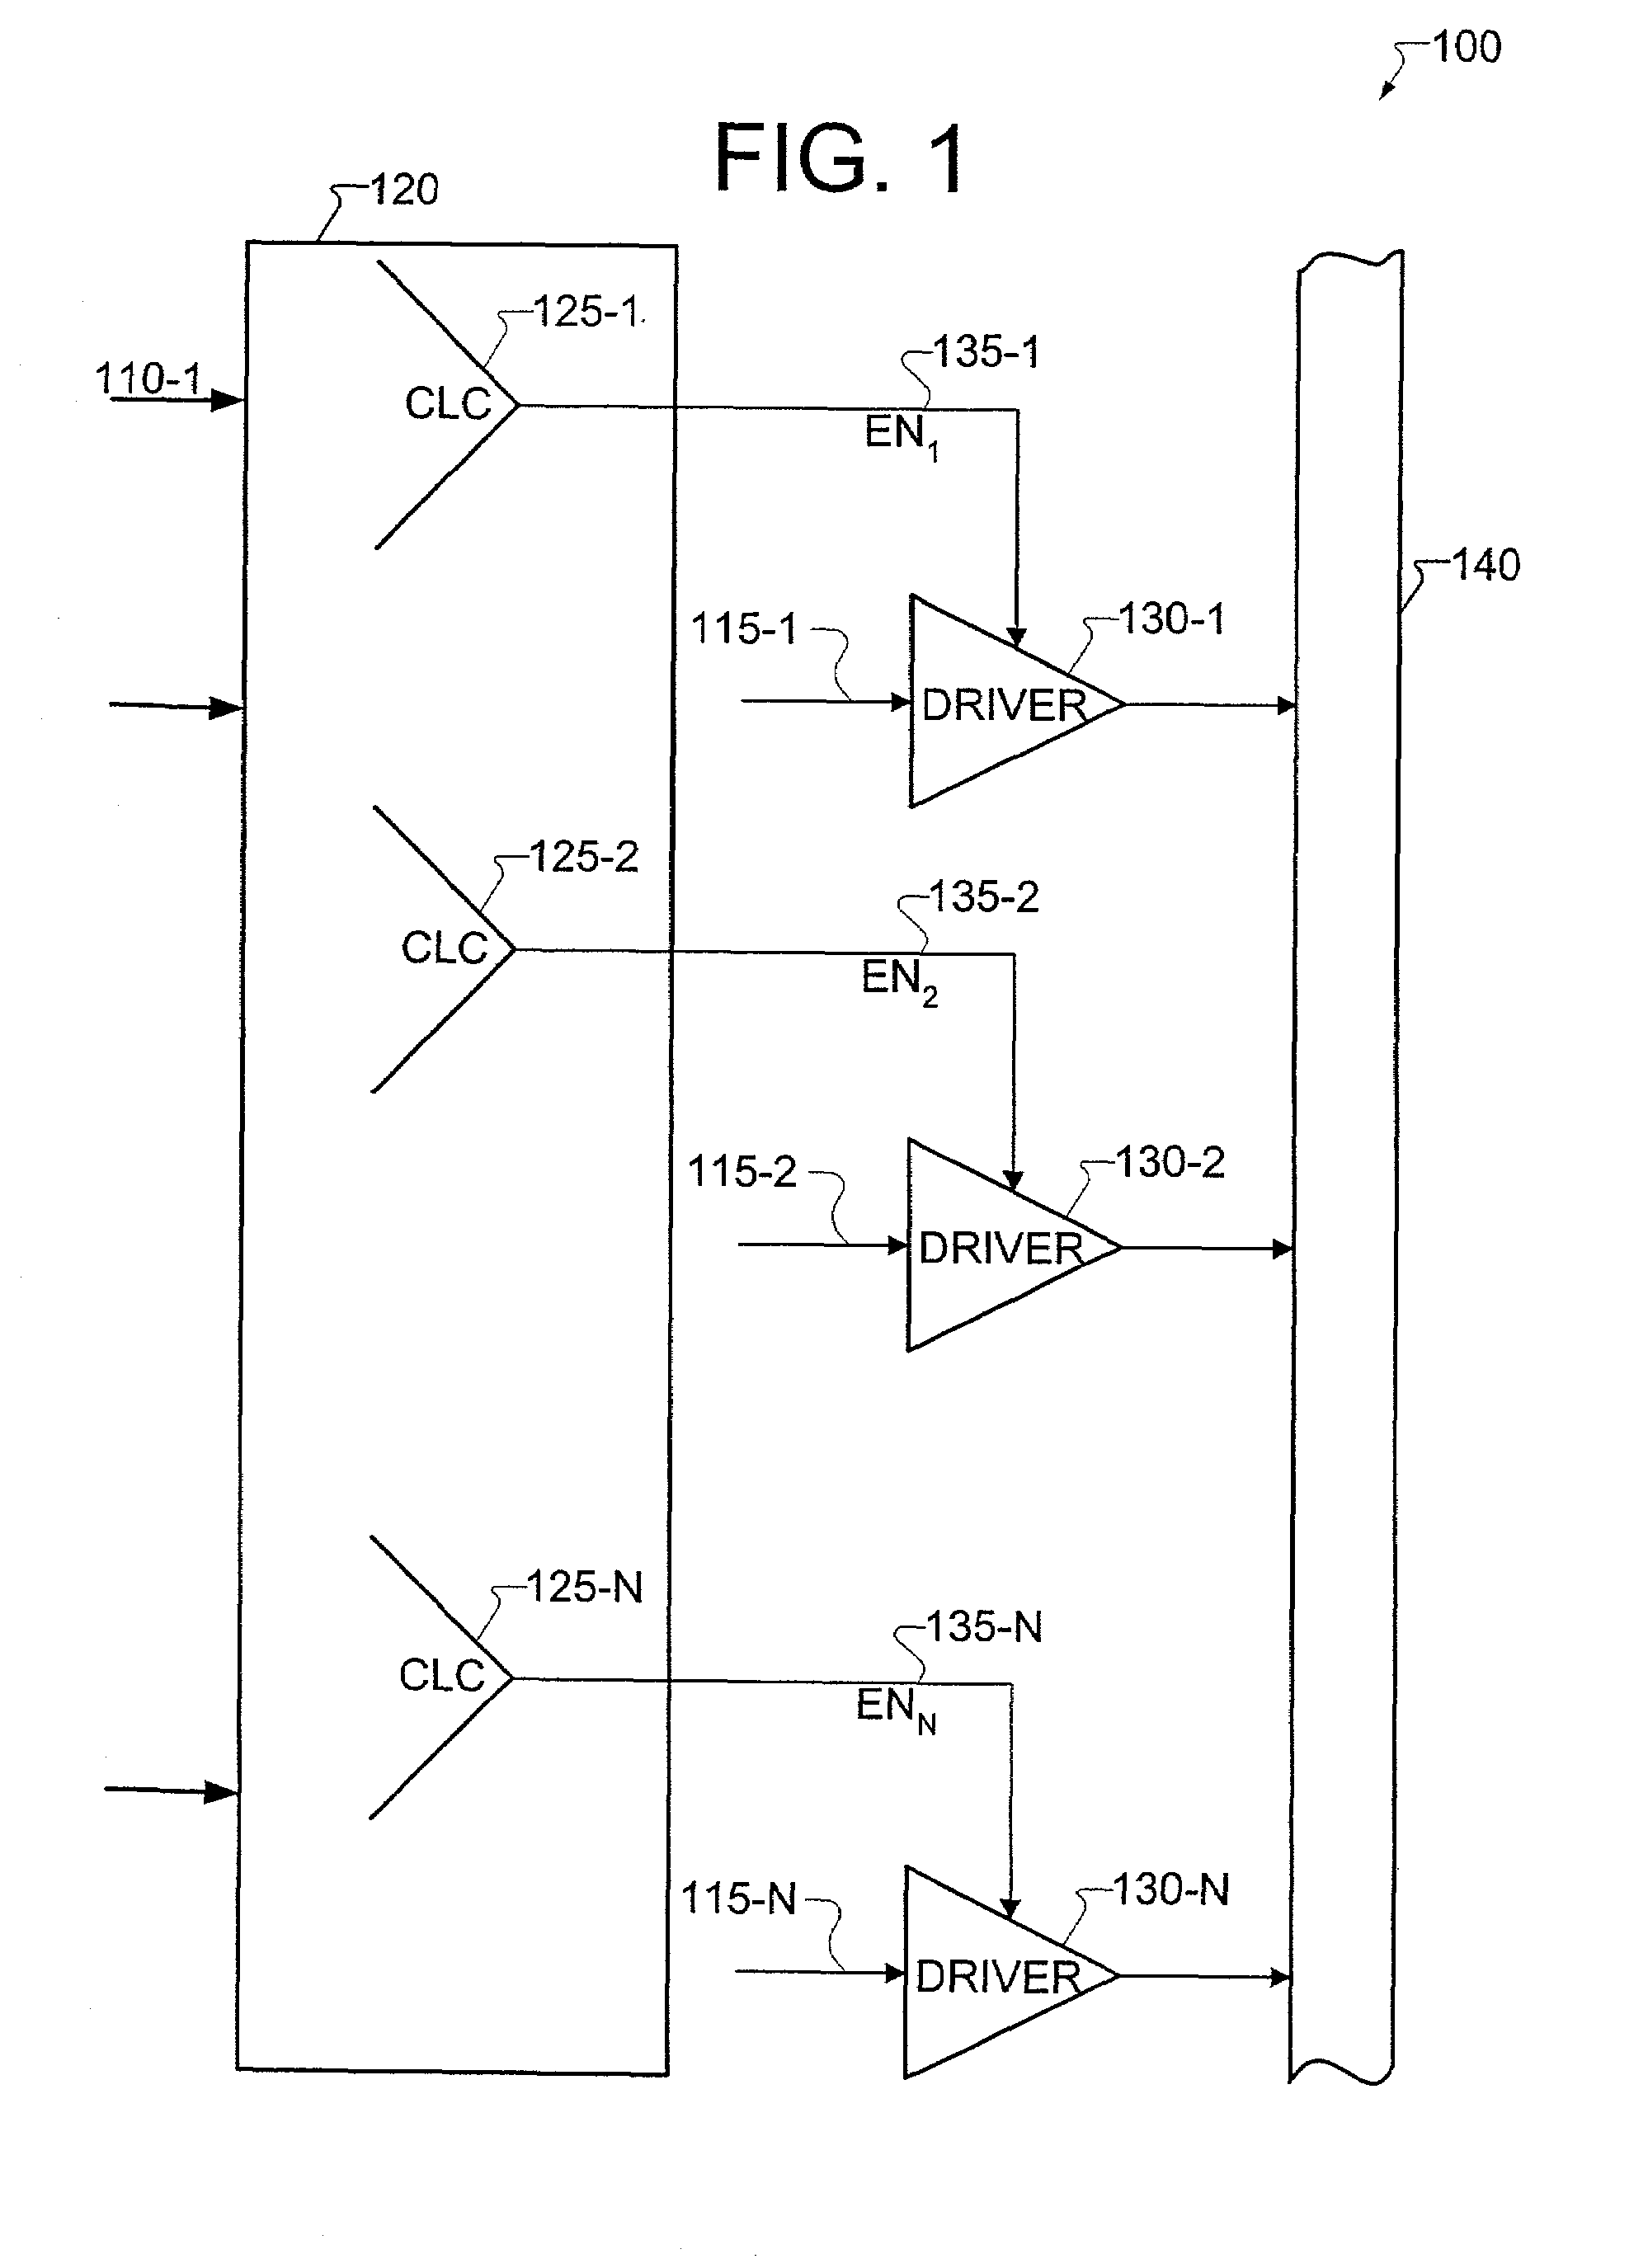 Method for detecting bus contention from RTL description